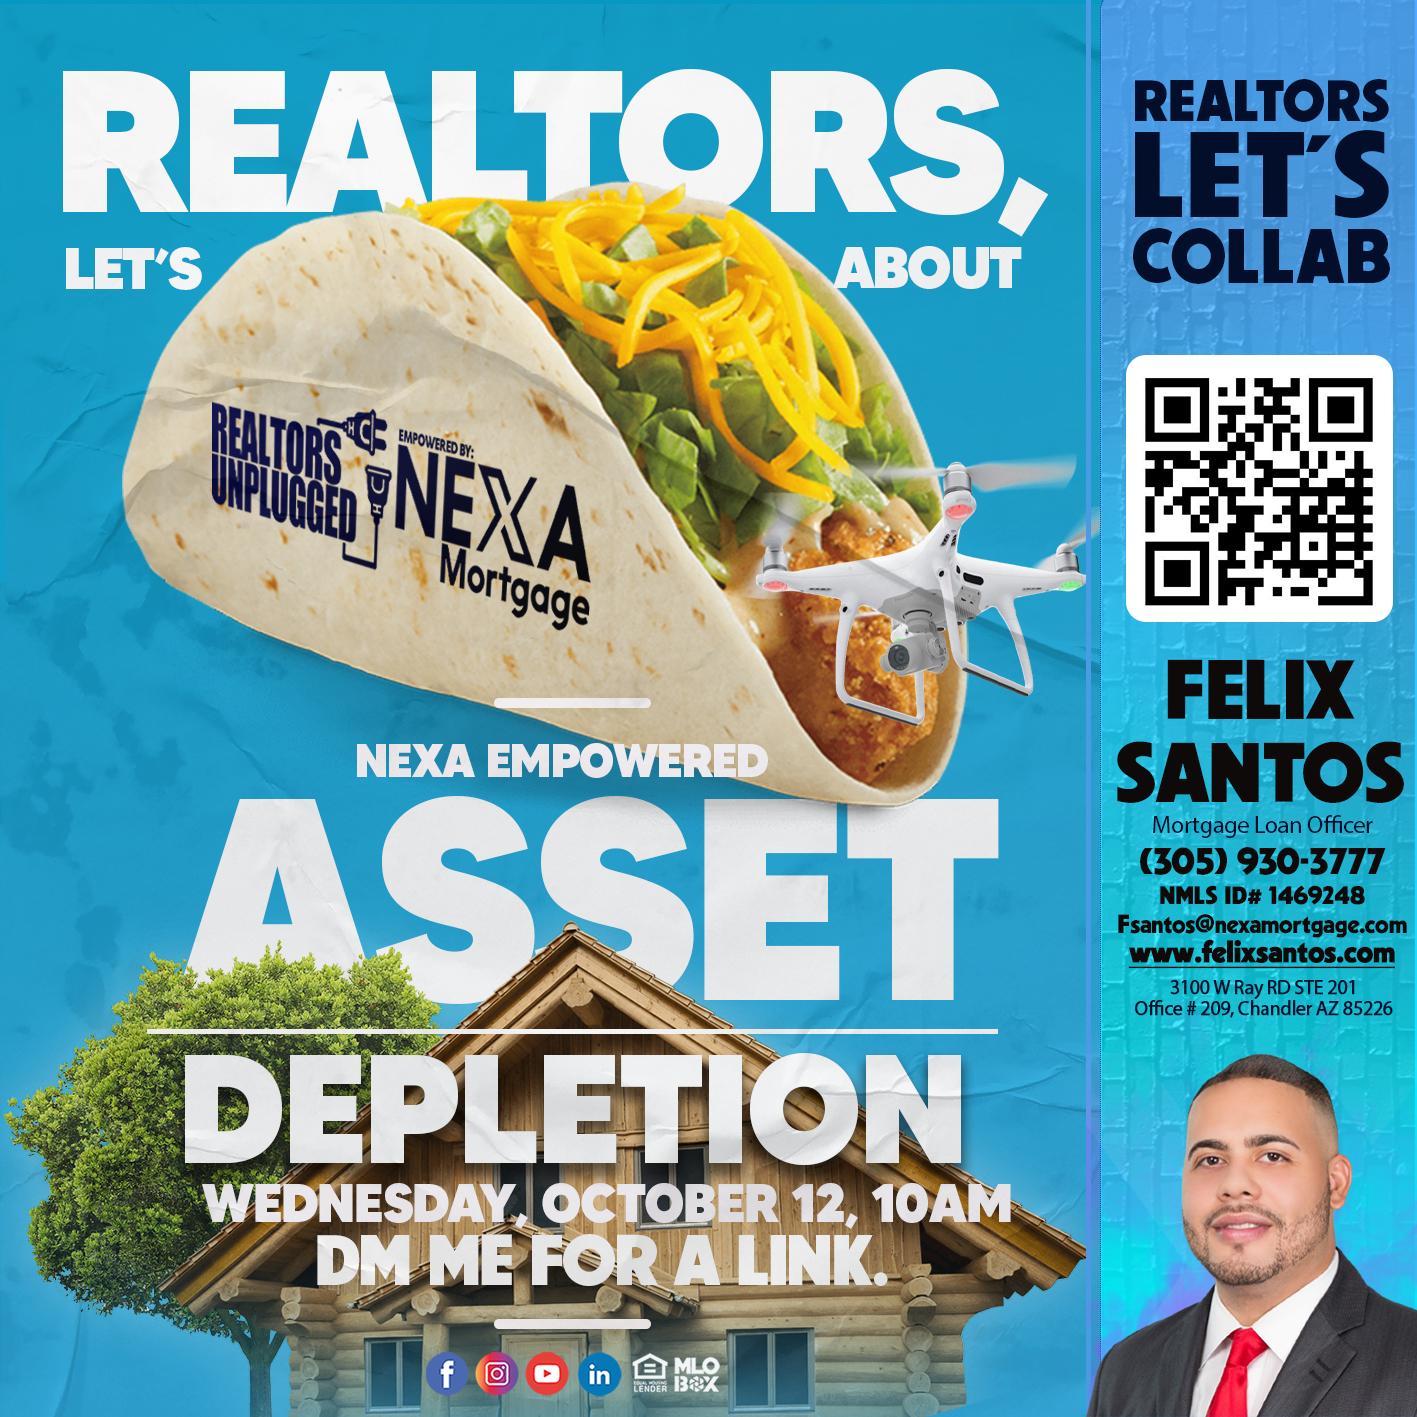 LET´S TACO ABOUT IT - Felix Santos -Mortgage Loan Officer